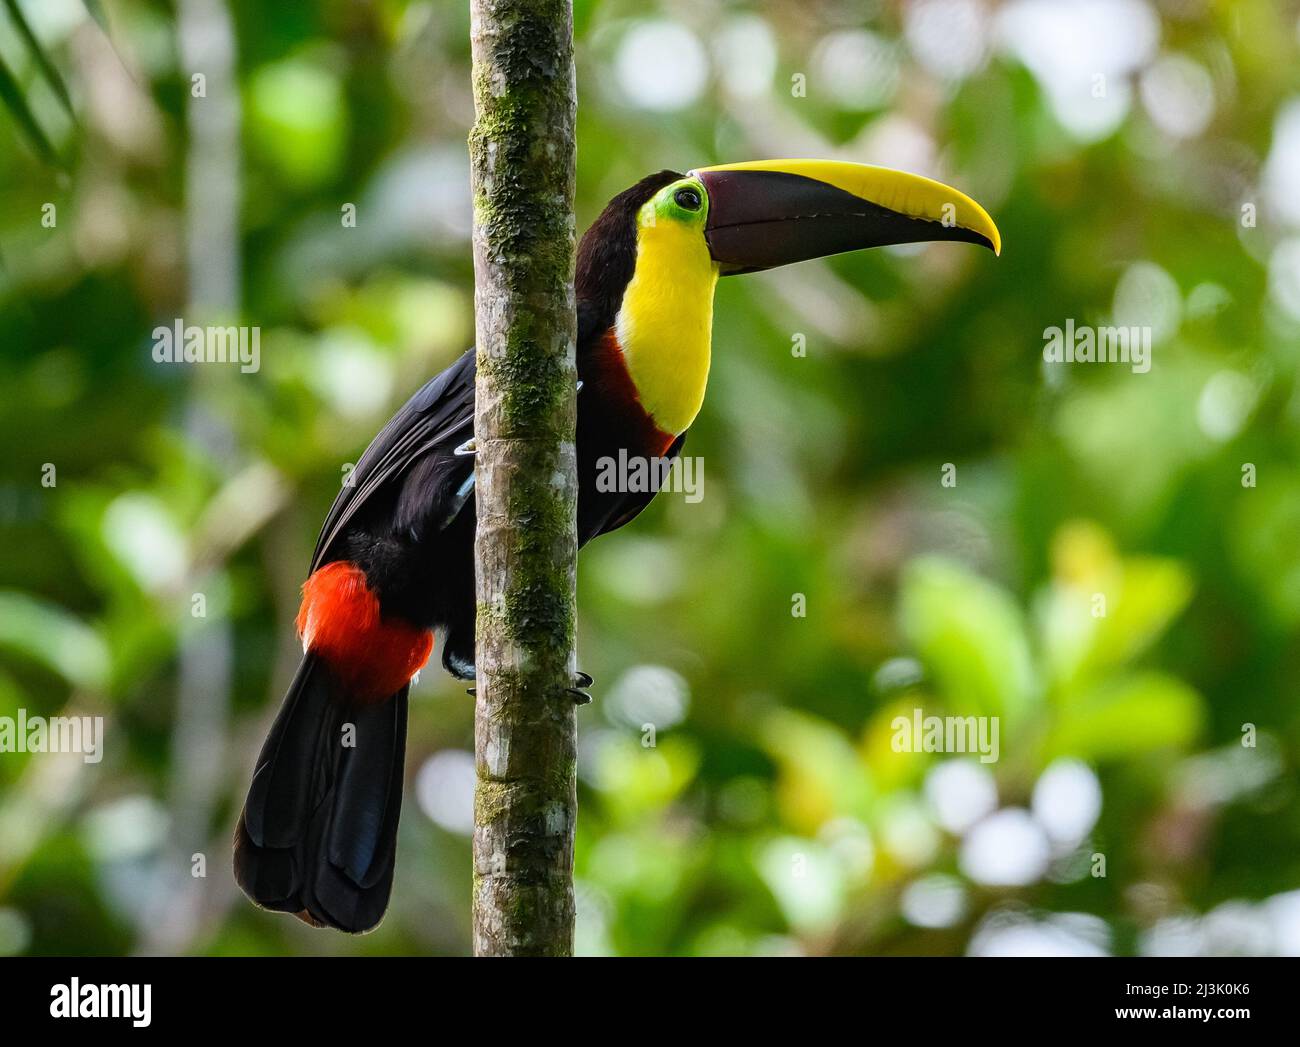 A Choco Toucan (Ramphastos brevis) perched on a palm tree. Colombia, South America. Stock Photo